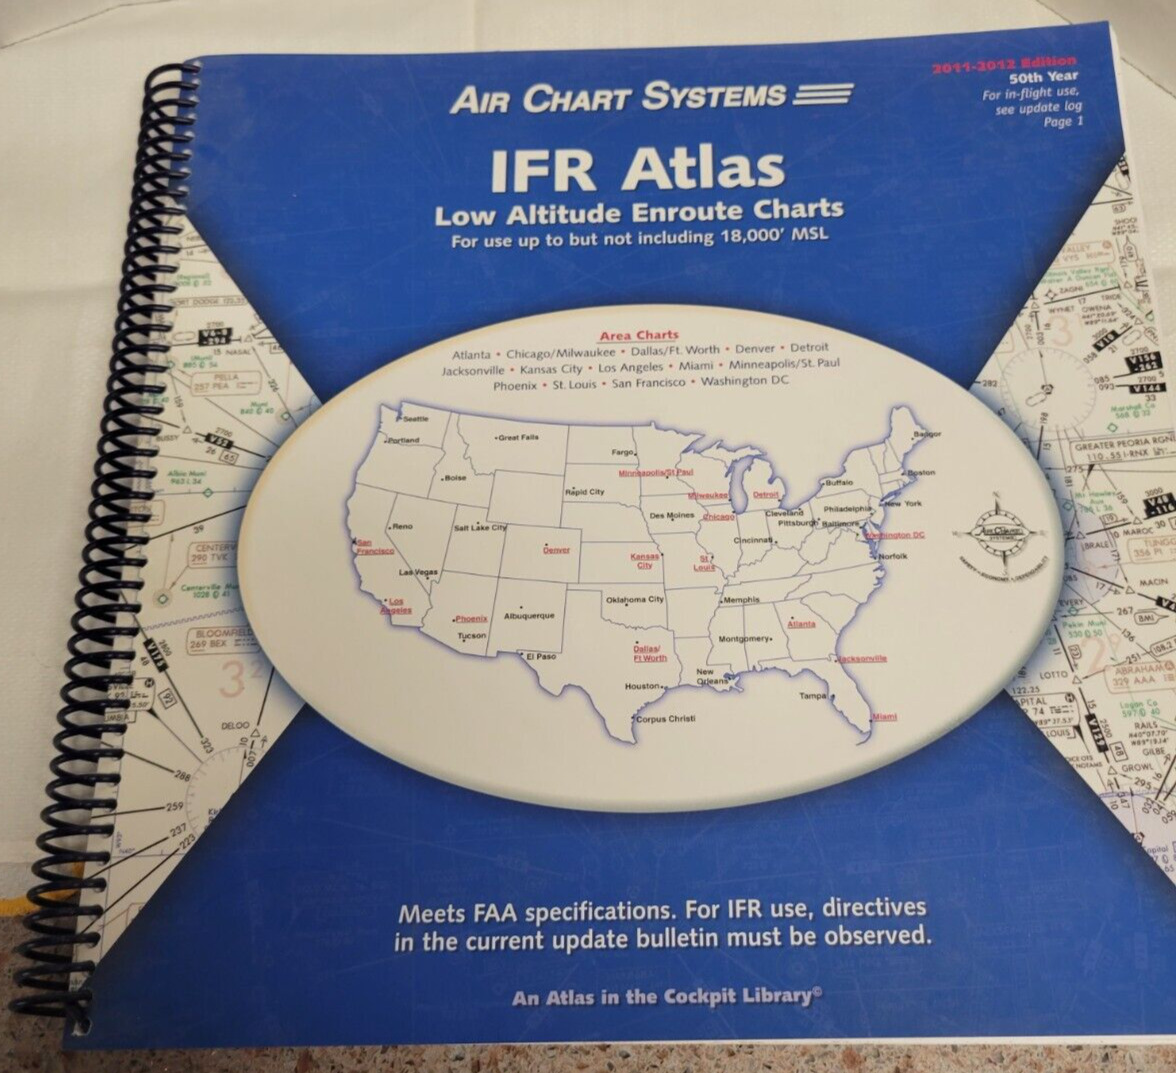 IFR ATLAS LOW ALTITUDE ENROUTE CHARTS MAJOR US CITIES 2011-2012 AIR CHART BOOK